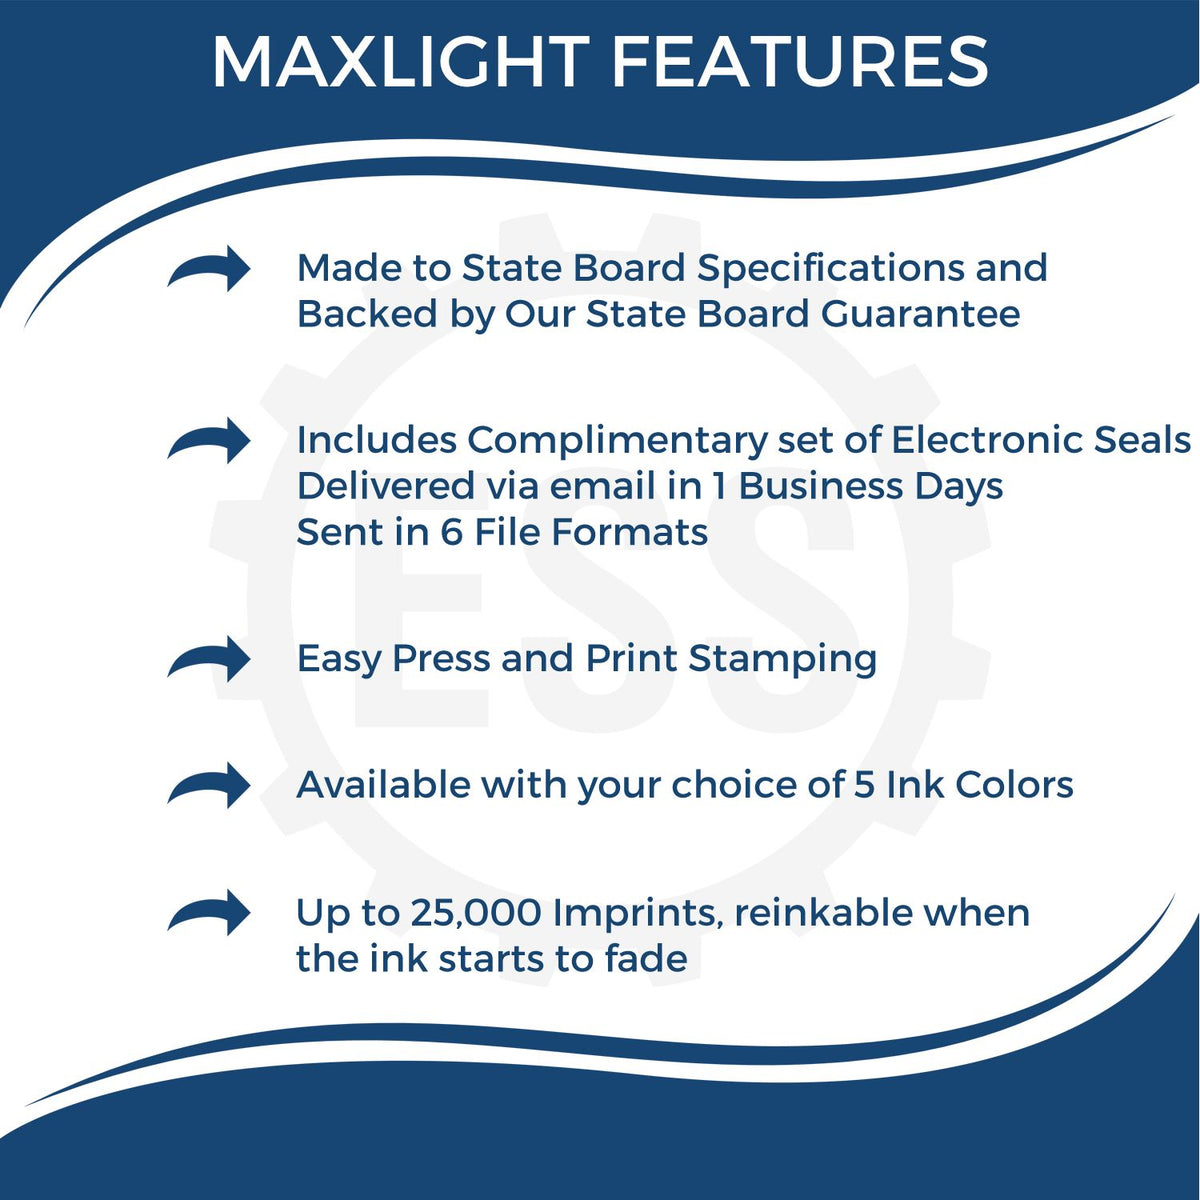 A picture of an infographic highlighting the selling points for the Premium MaxLight Pre-Inked New Hampshire Engineering Stamp